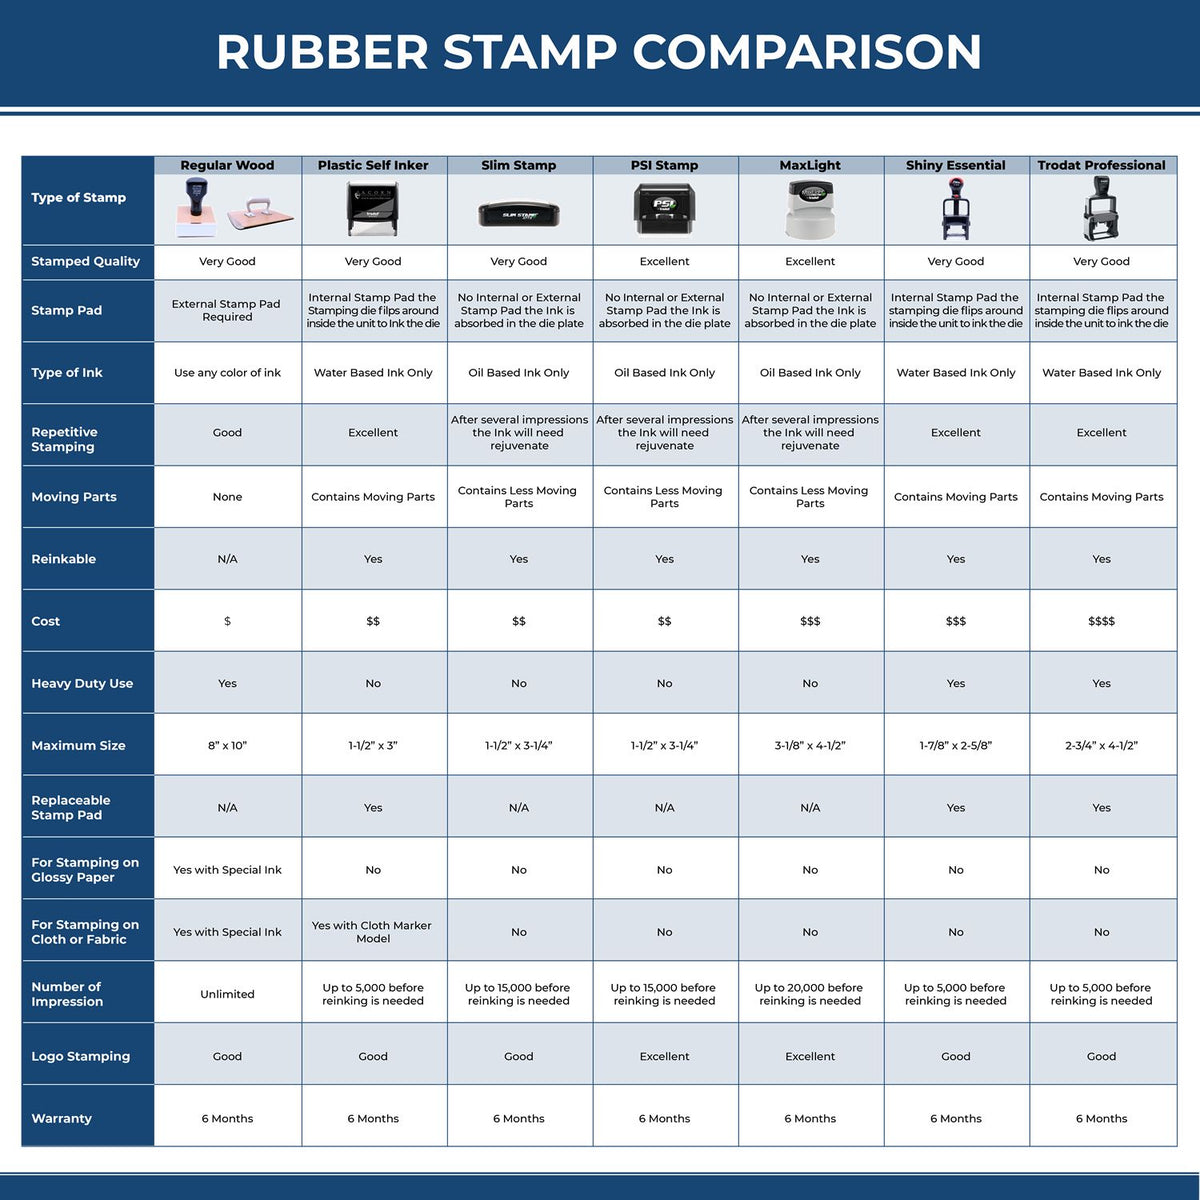 Large Self-Inking Covid-19 Patient Stamp 5510S Rubber Stamp Comparison